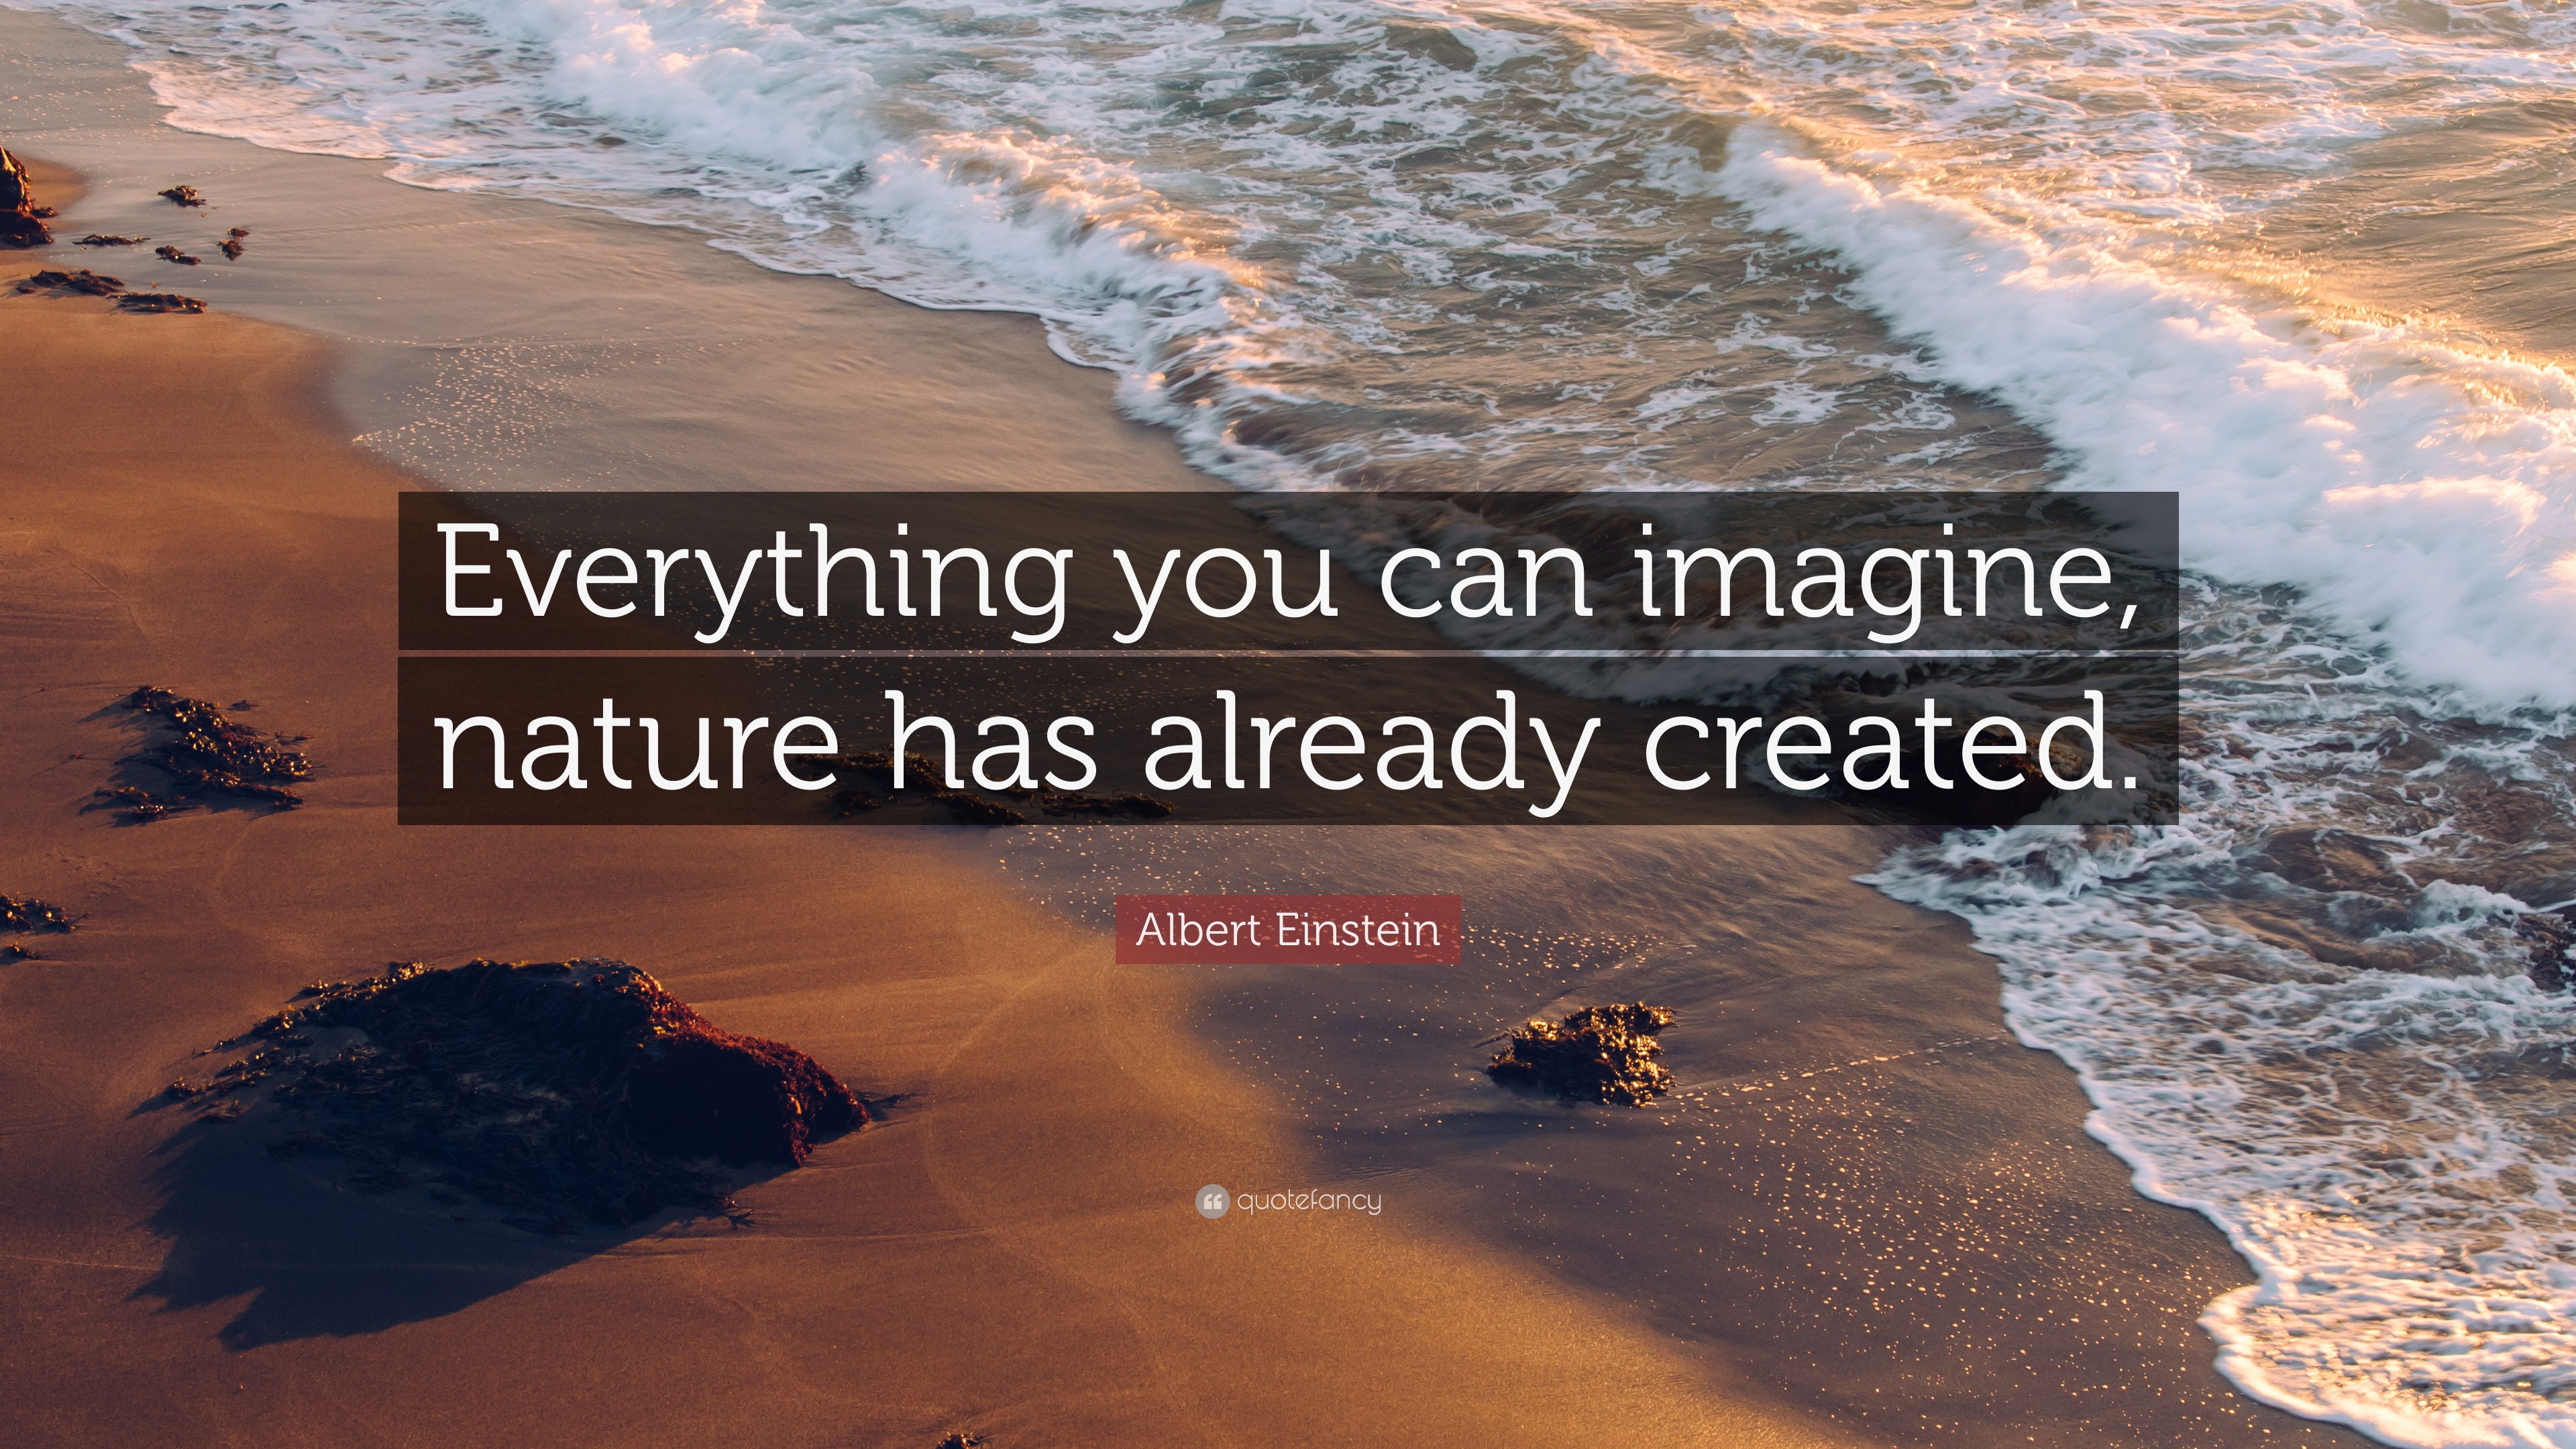 Albert Einstein Quote: “Everything you can imagine, nature has already  created.”